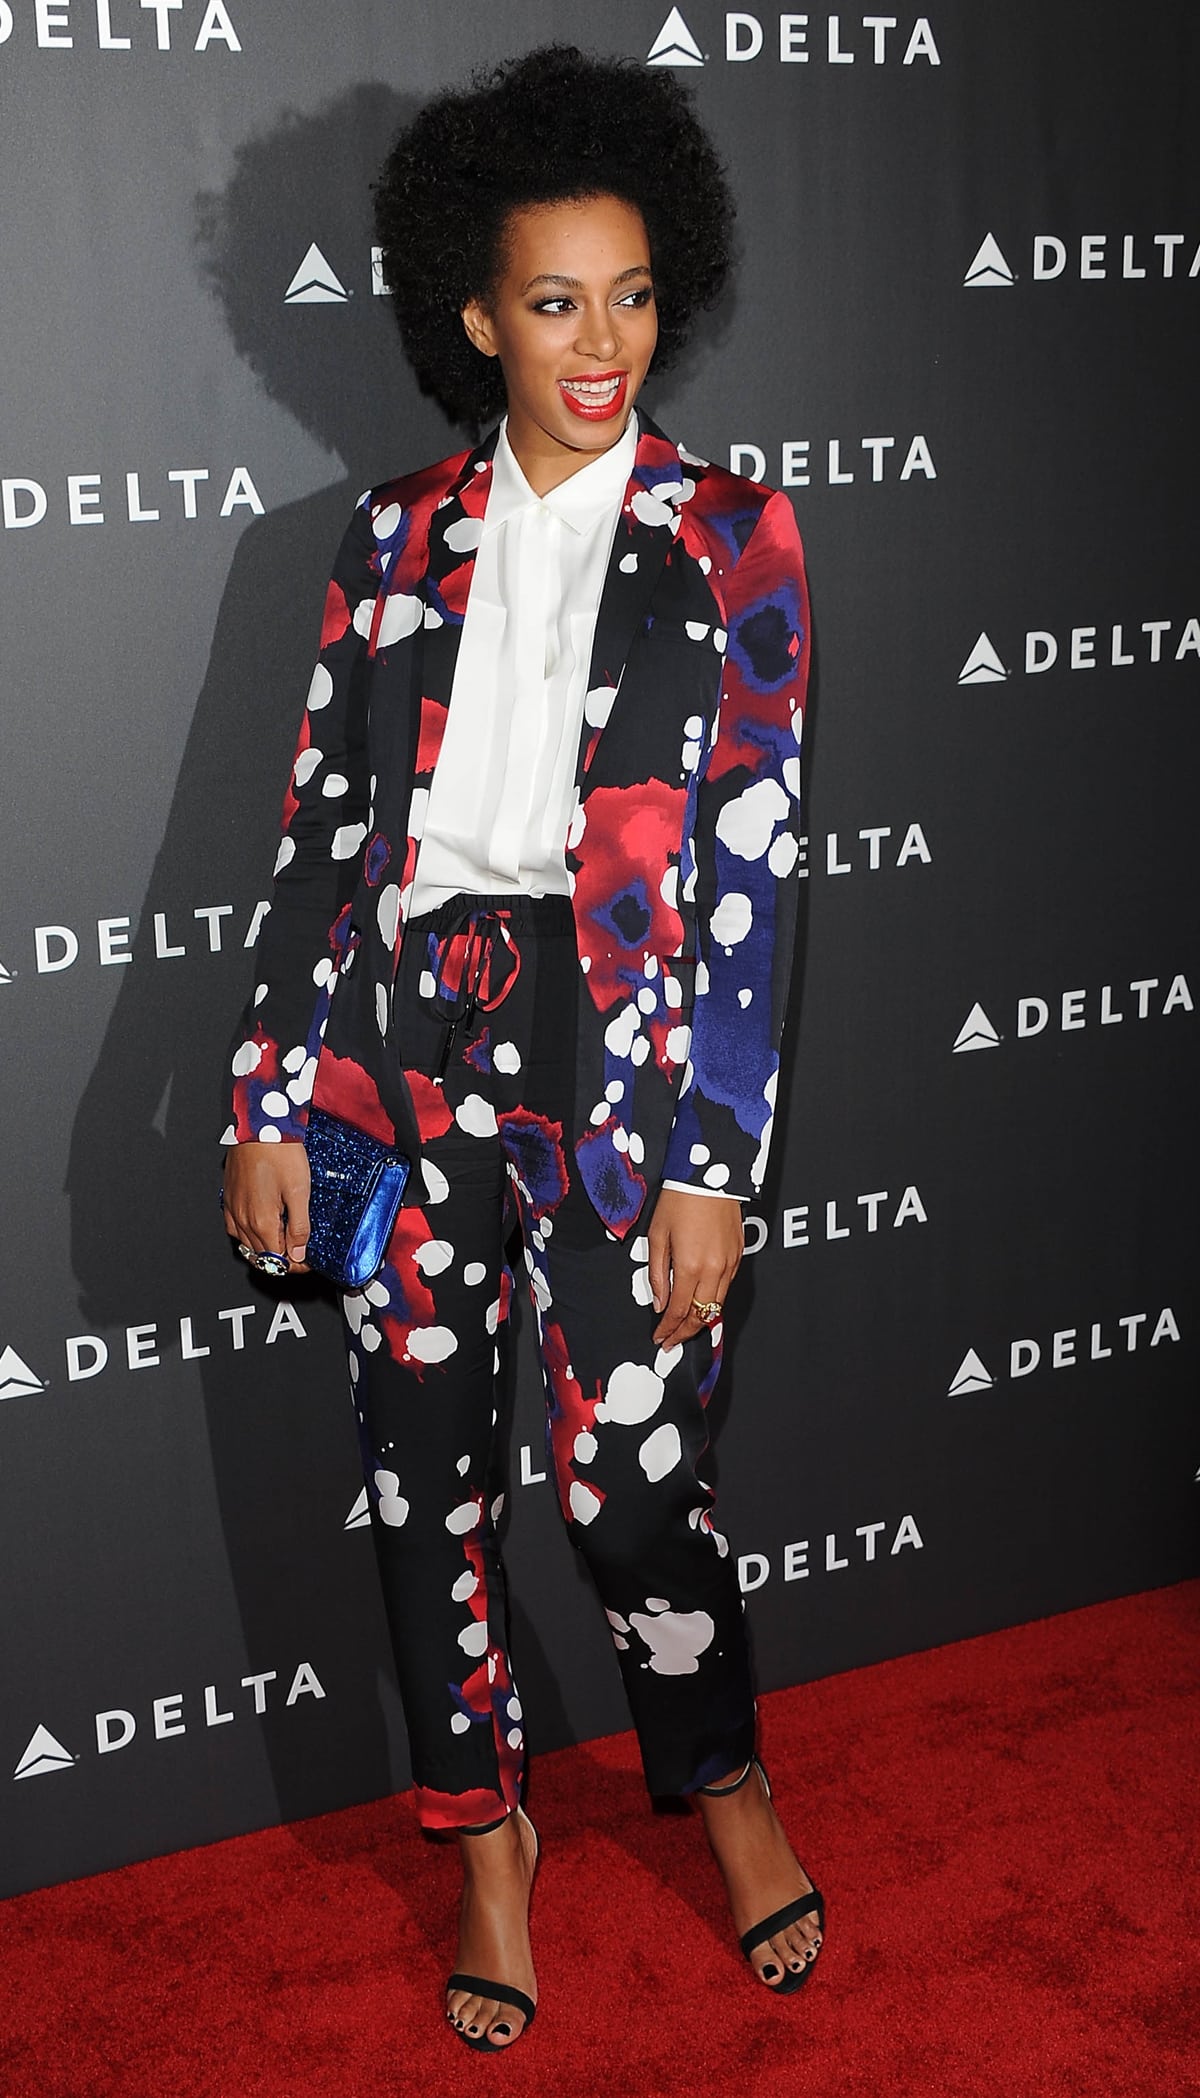 Solange Knowles attended the Grammy Week LA Music Industry reception in Los Angeles wearing a vibrant, color-rich Diane von Furstenberg suit from the Spring 2013 collection